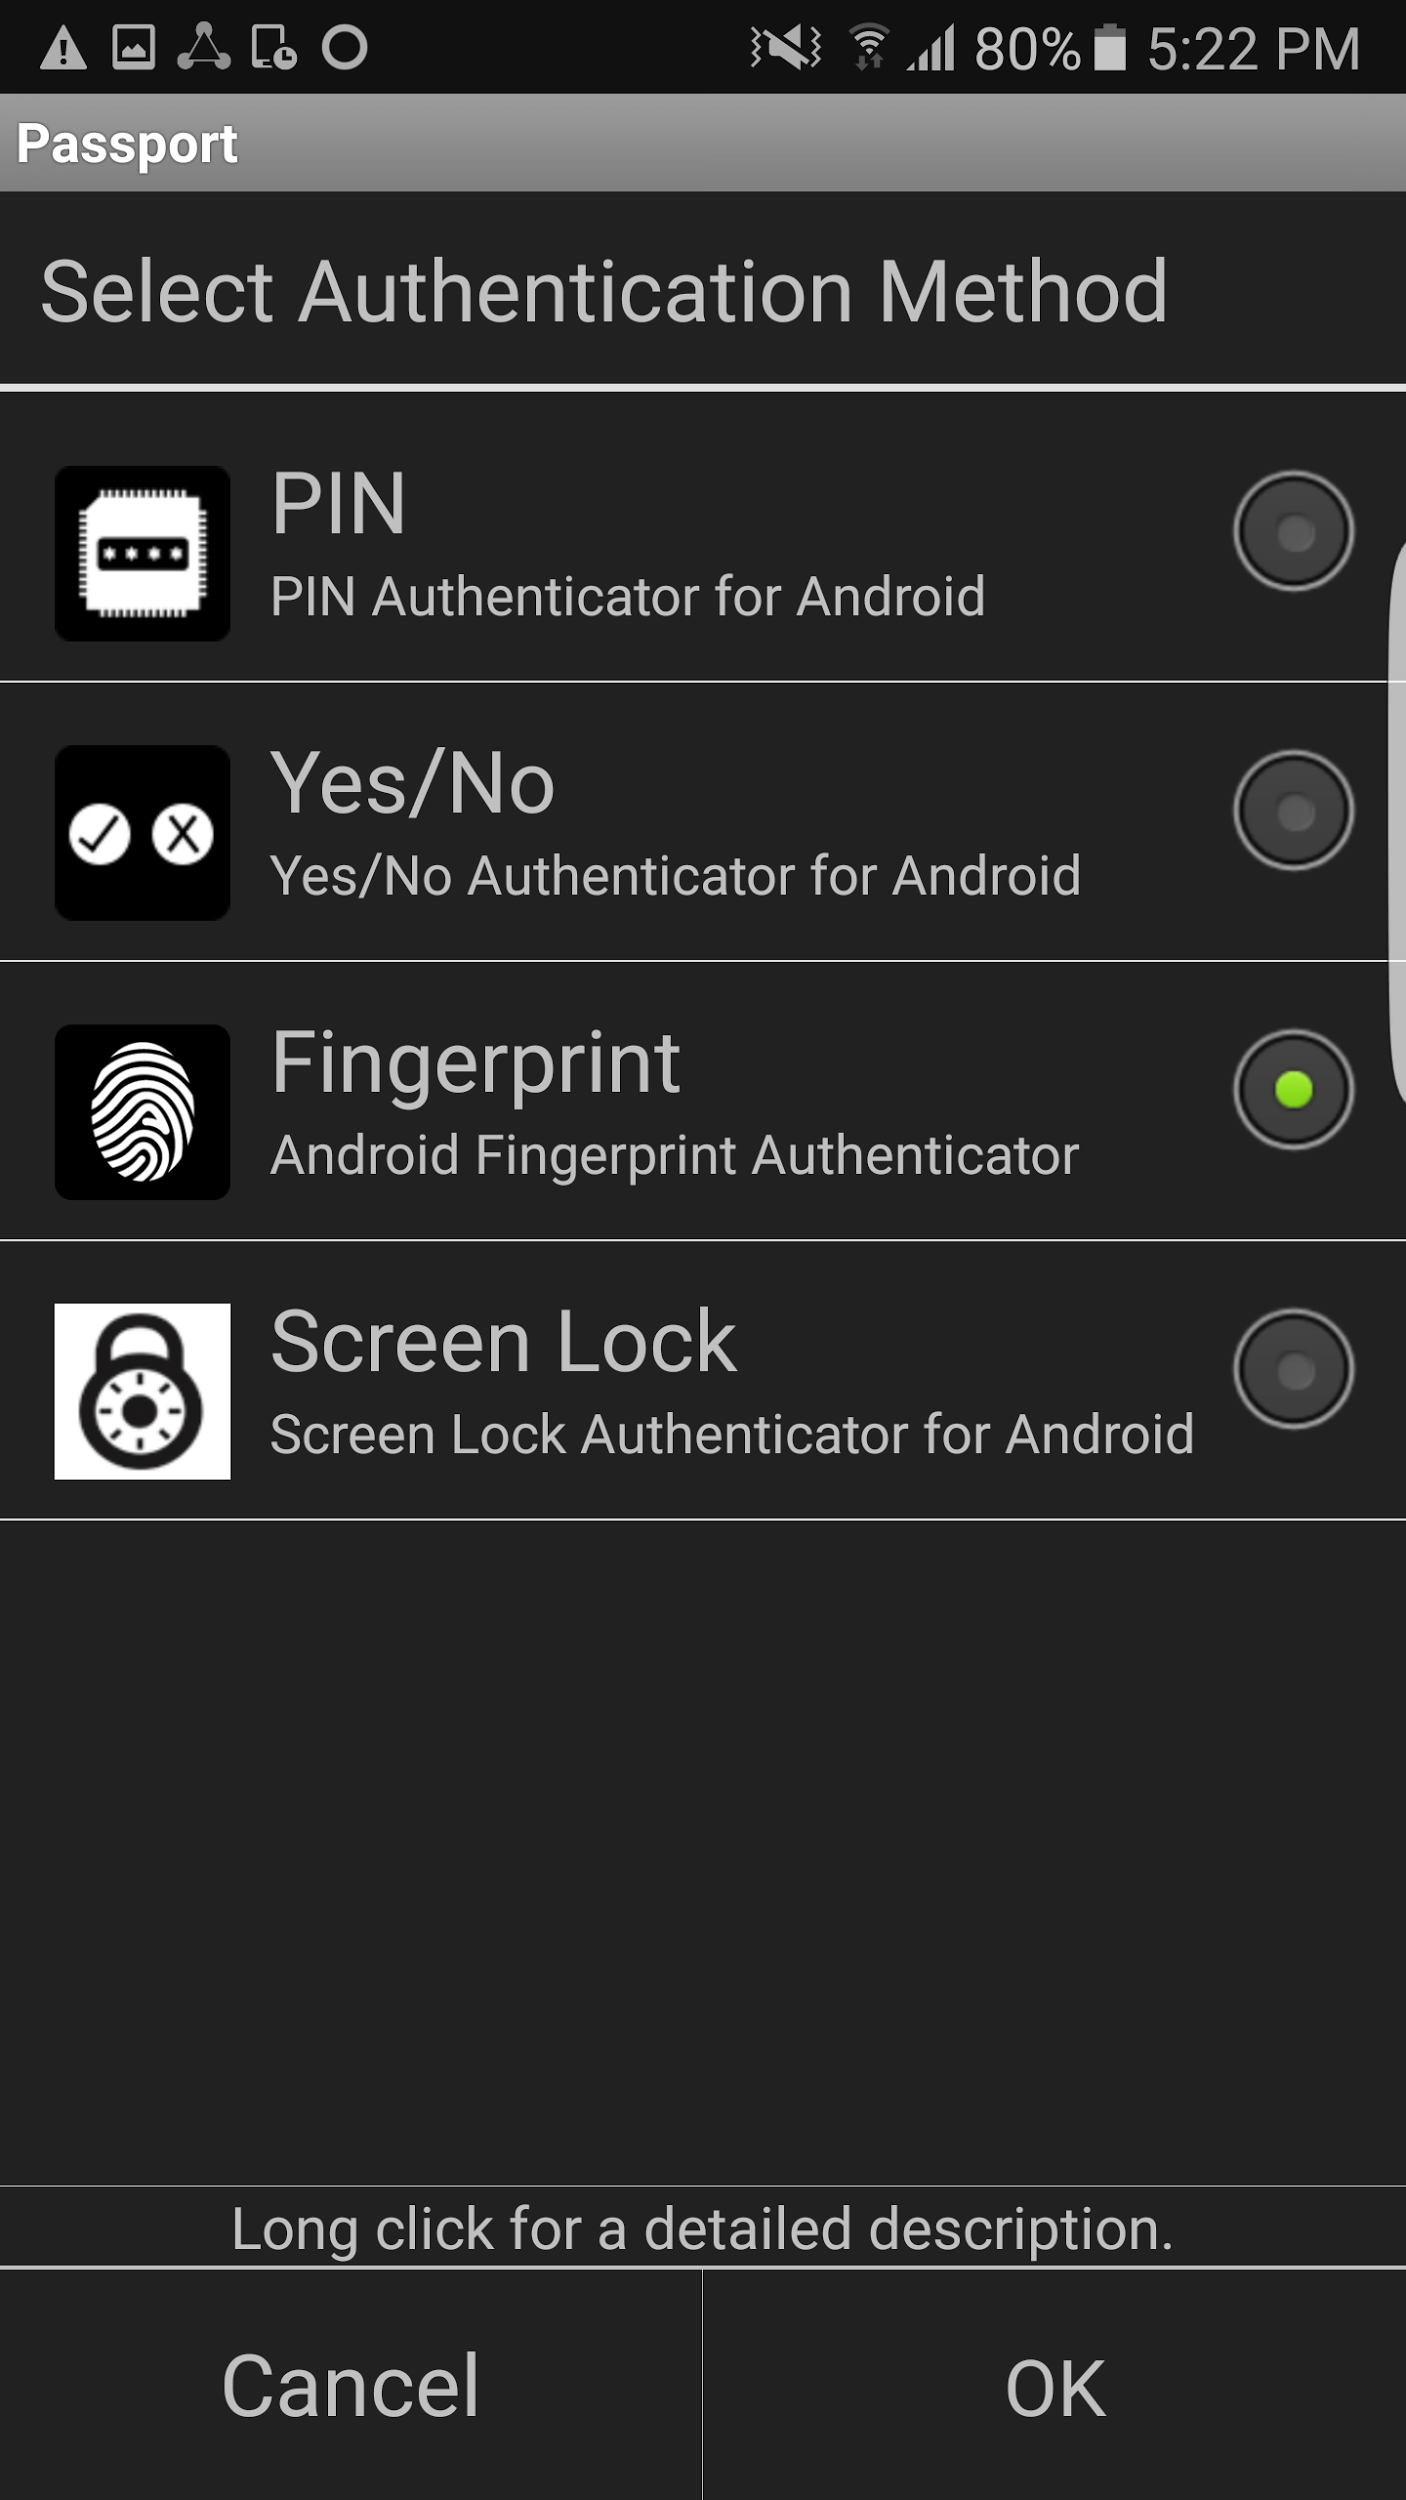 The right side of this figure shows the application on an Android device prompting the user to select the type of verification to use (fingerprint, PIN, etc.)